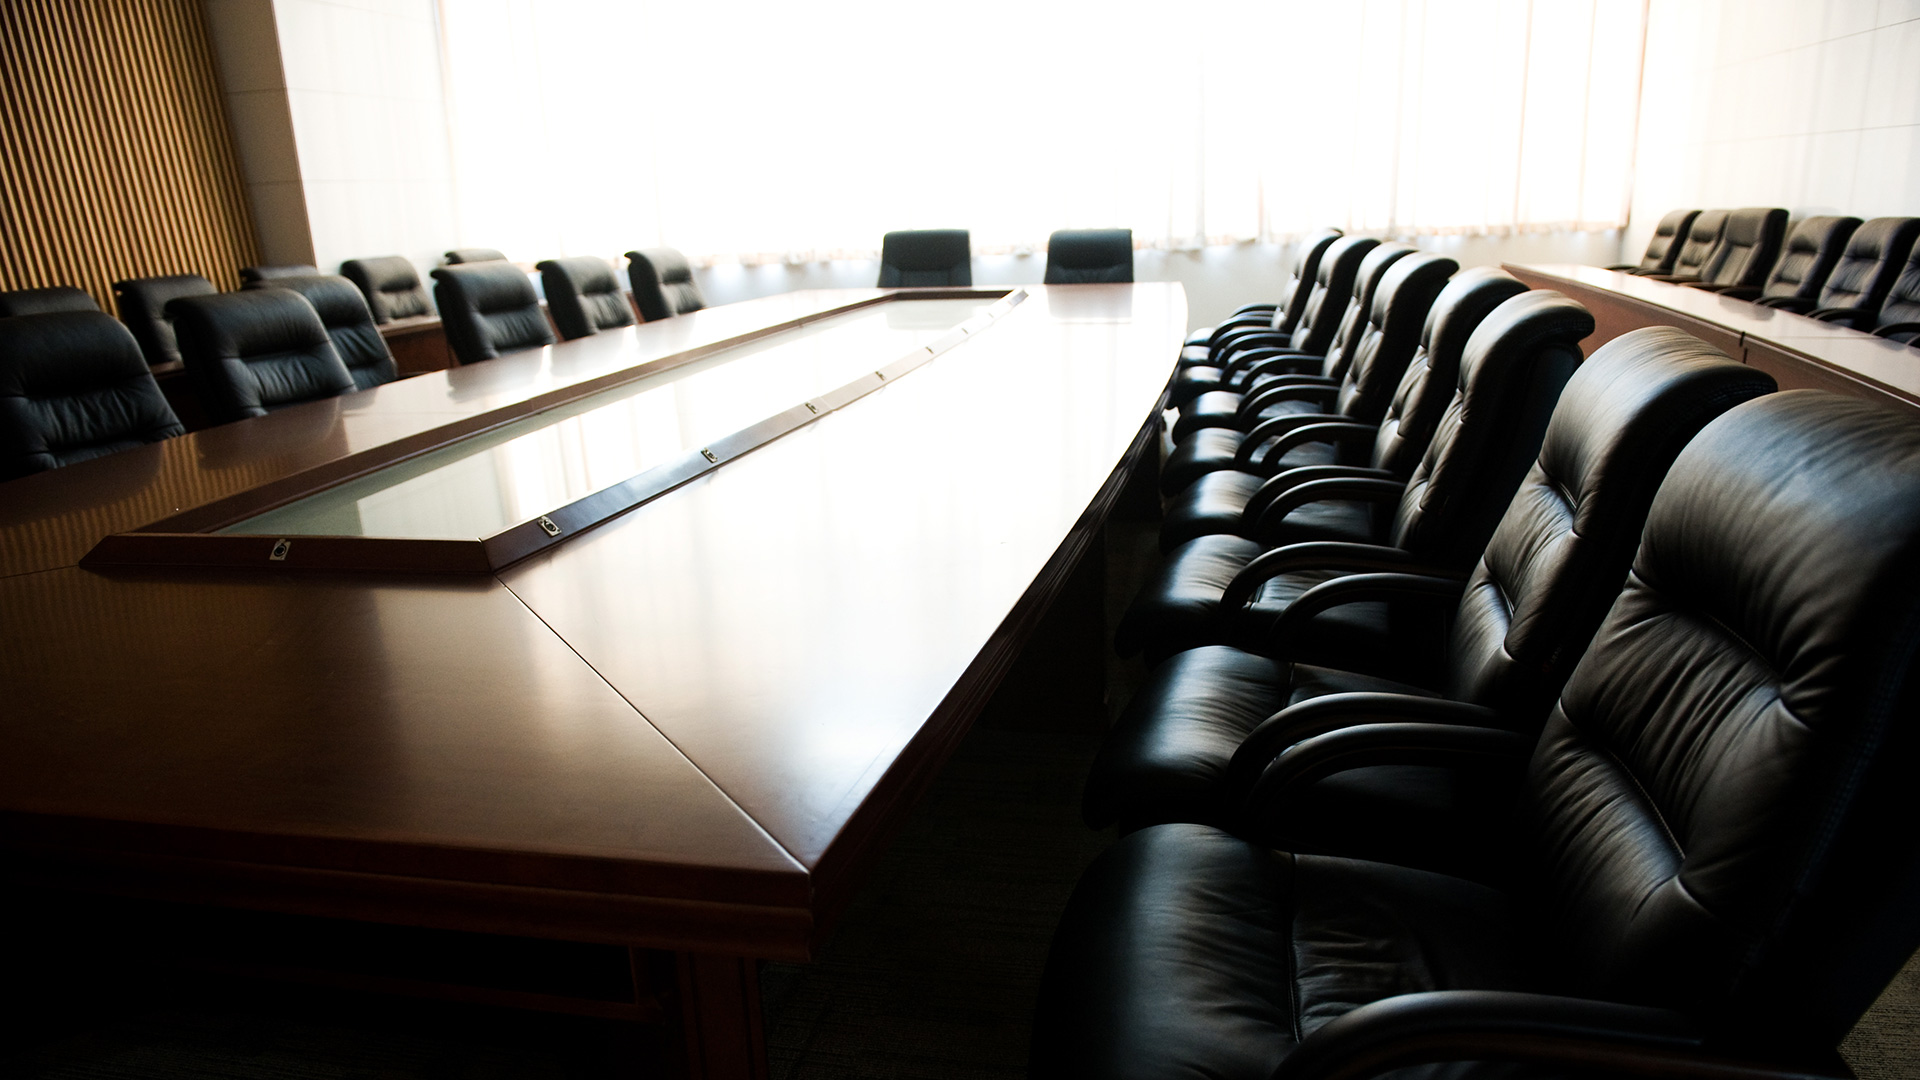 Board diversity up, C-suite diversity down in second year of required CBCA disclosure